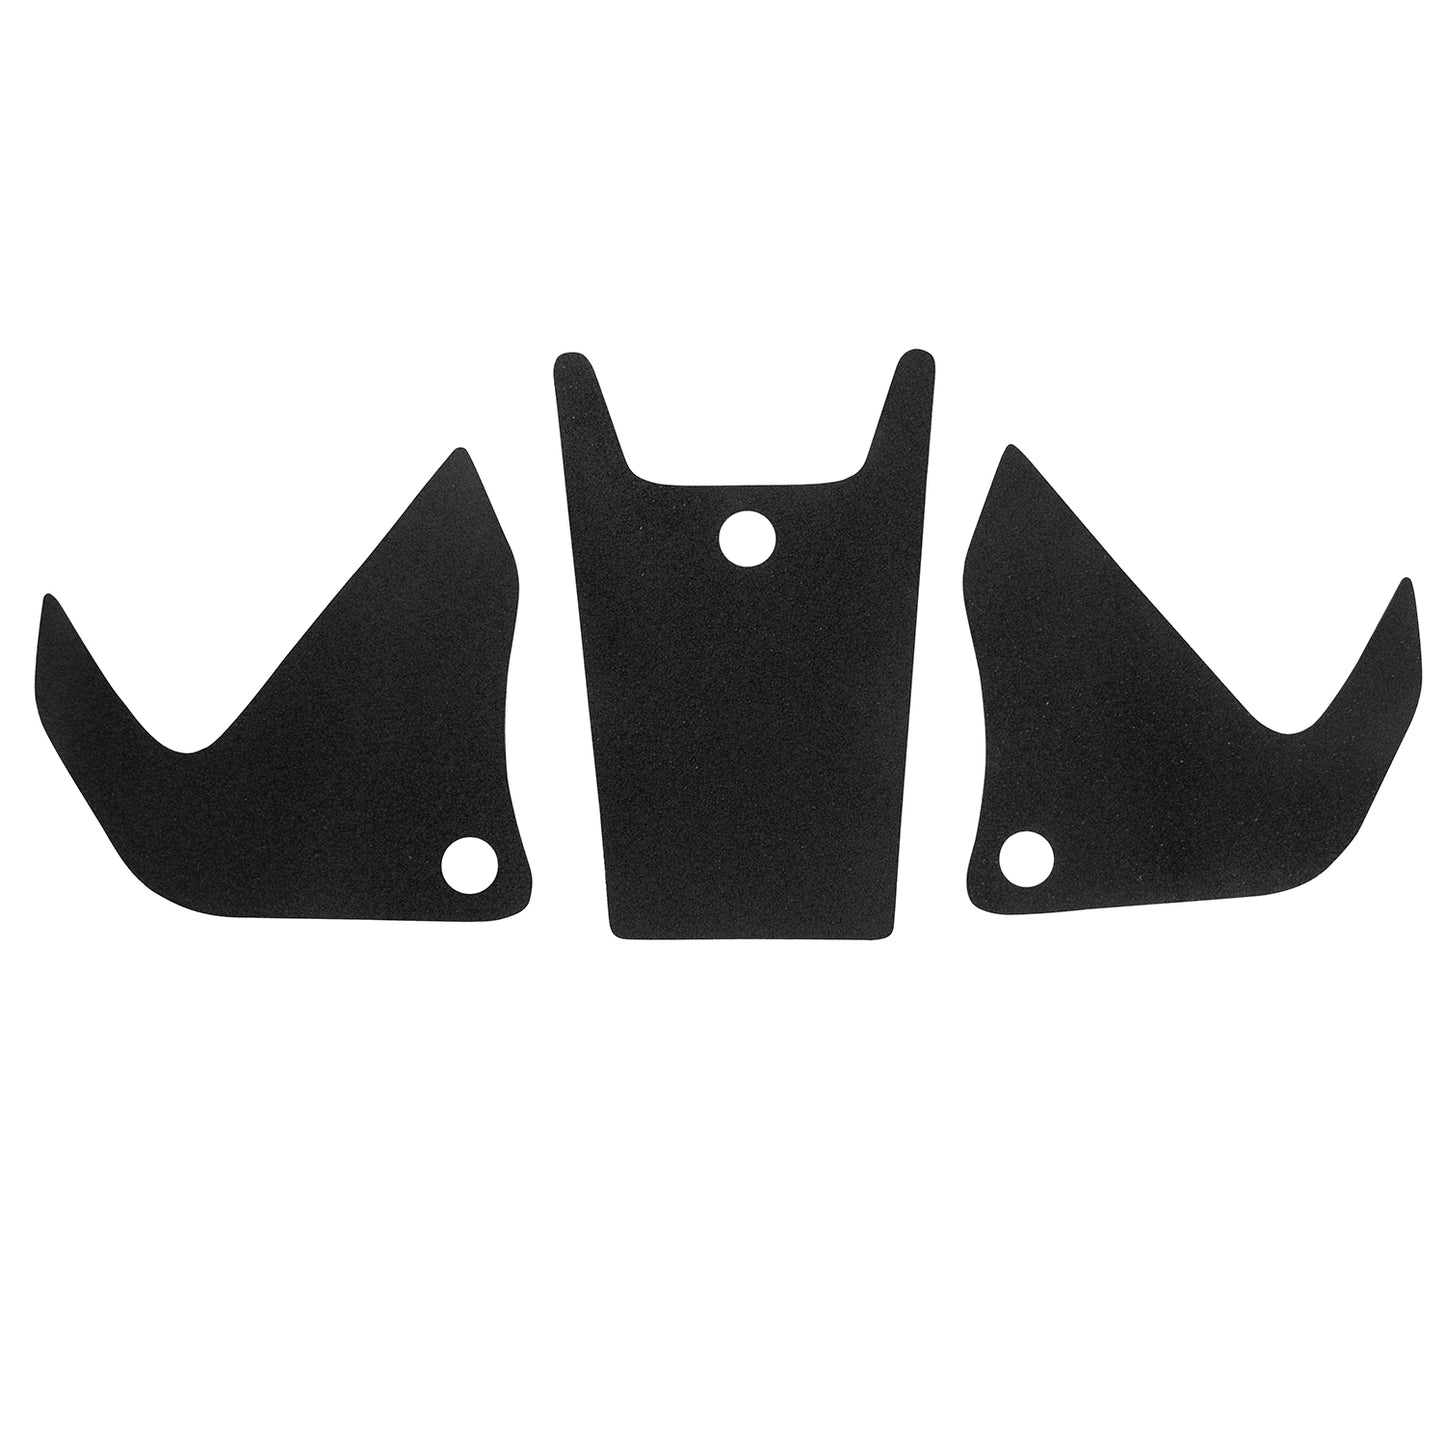 Wolfline Motorcycle Anti Slip Tank Pad Stickers Side Gas Tank Pad Knee Grip Decals Protection For KTM 1050 1190 1290 Adv